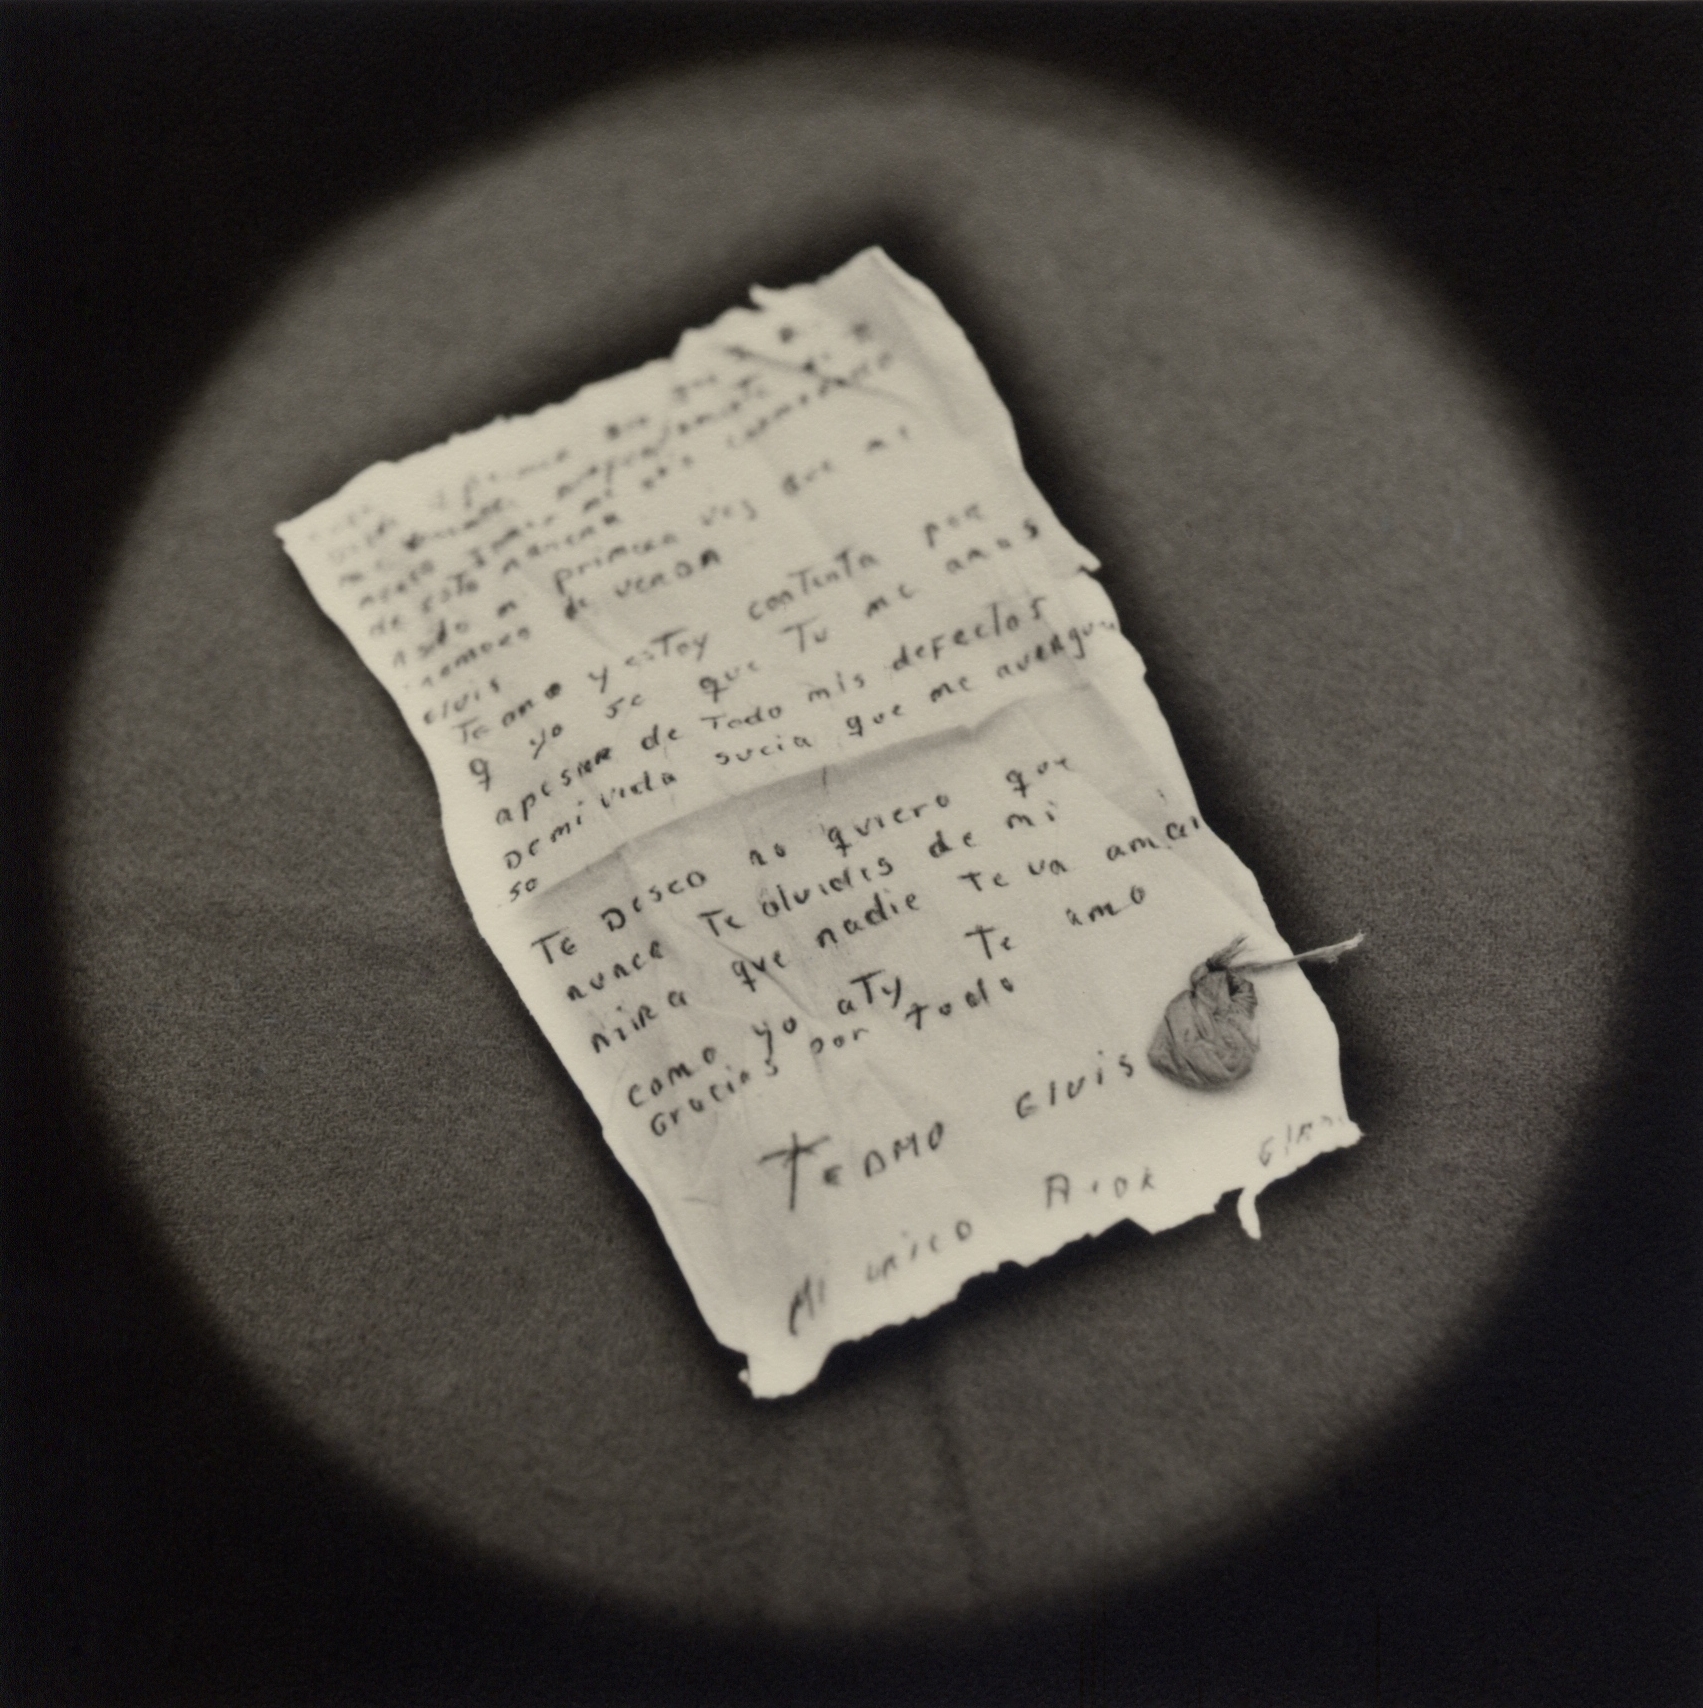   Incriminating love letter written by prostitute to her lover   Toned gelatin silver print.   16 x 16 in. (40 x 40 cm.) 